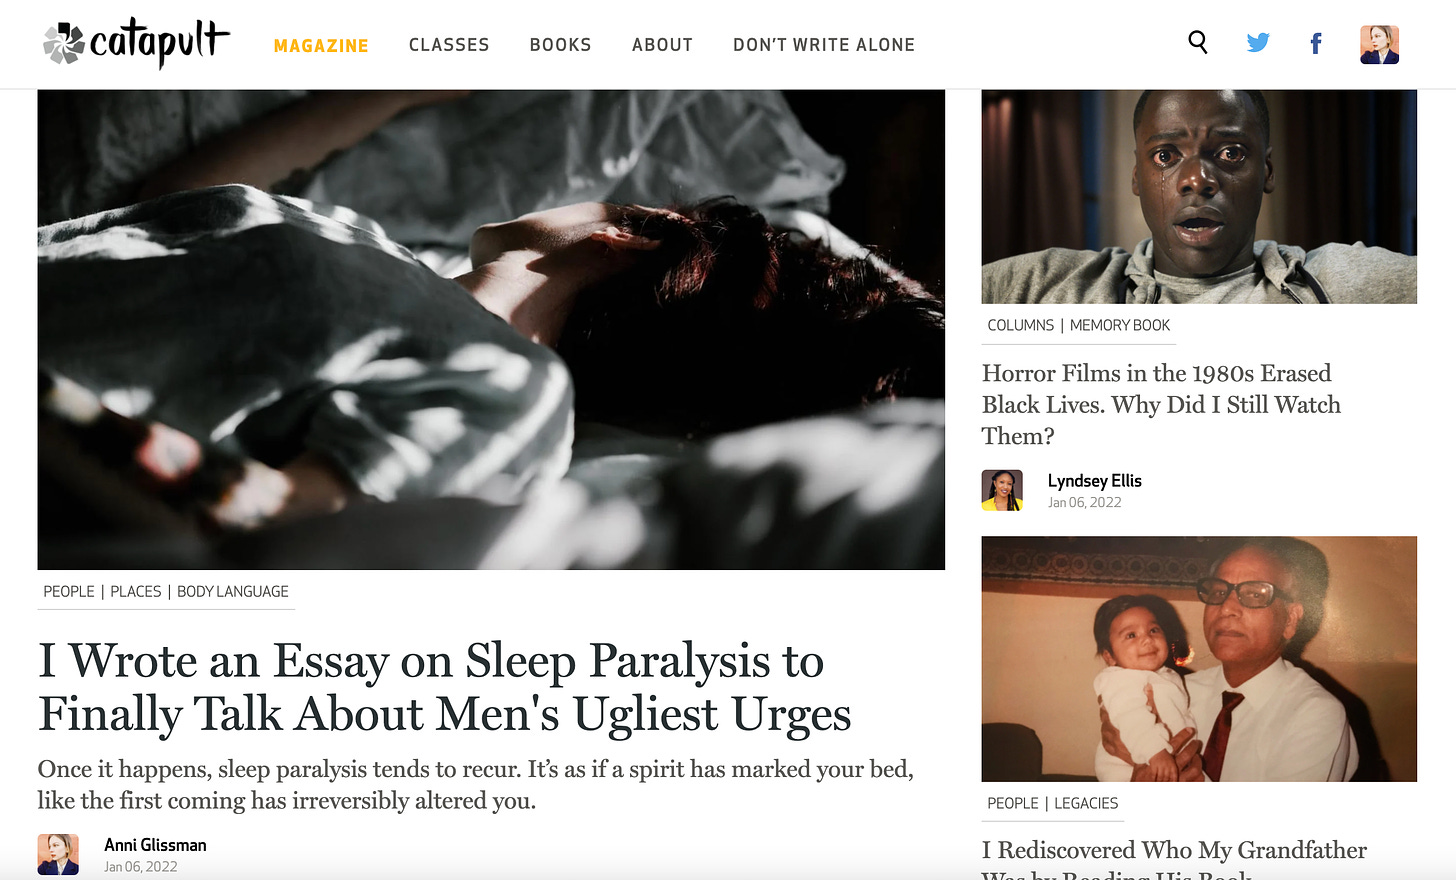 https://catapult.co/stories/im-writing-about-sleep-paralysis-to-finally-talk-about-mens-worst-urges-anni-glissman